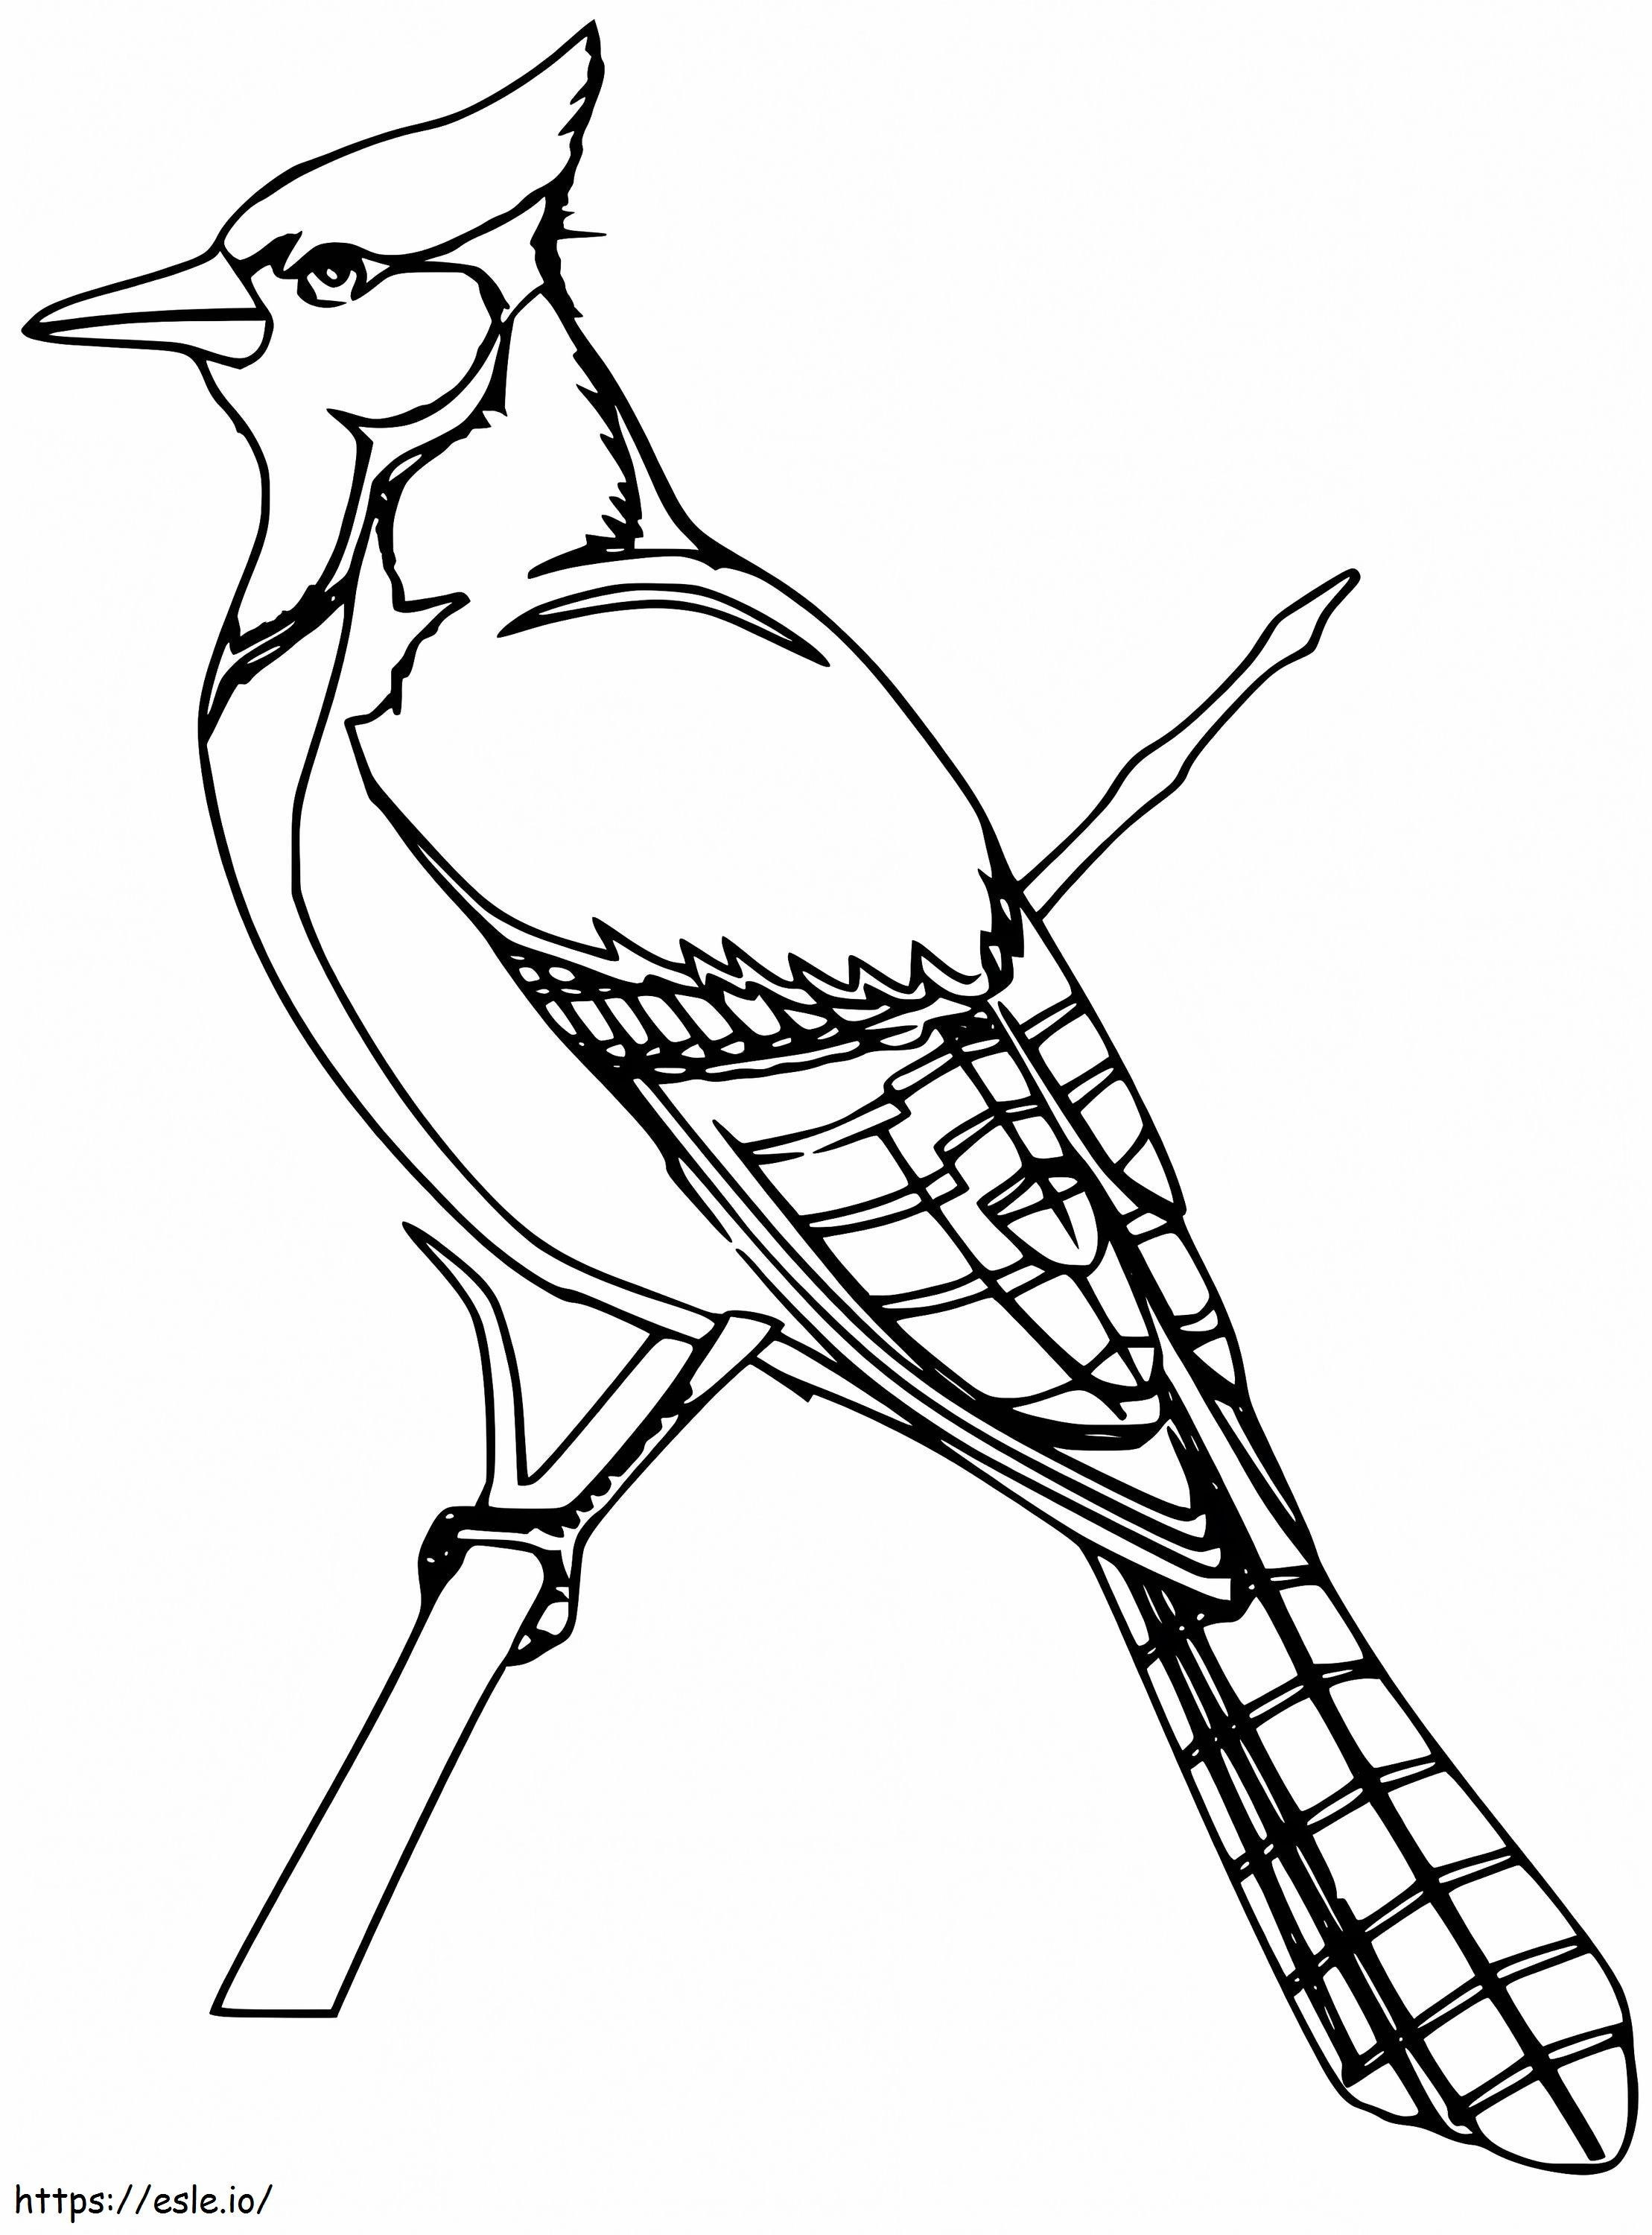 Blue Jay 6 coloring page